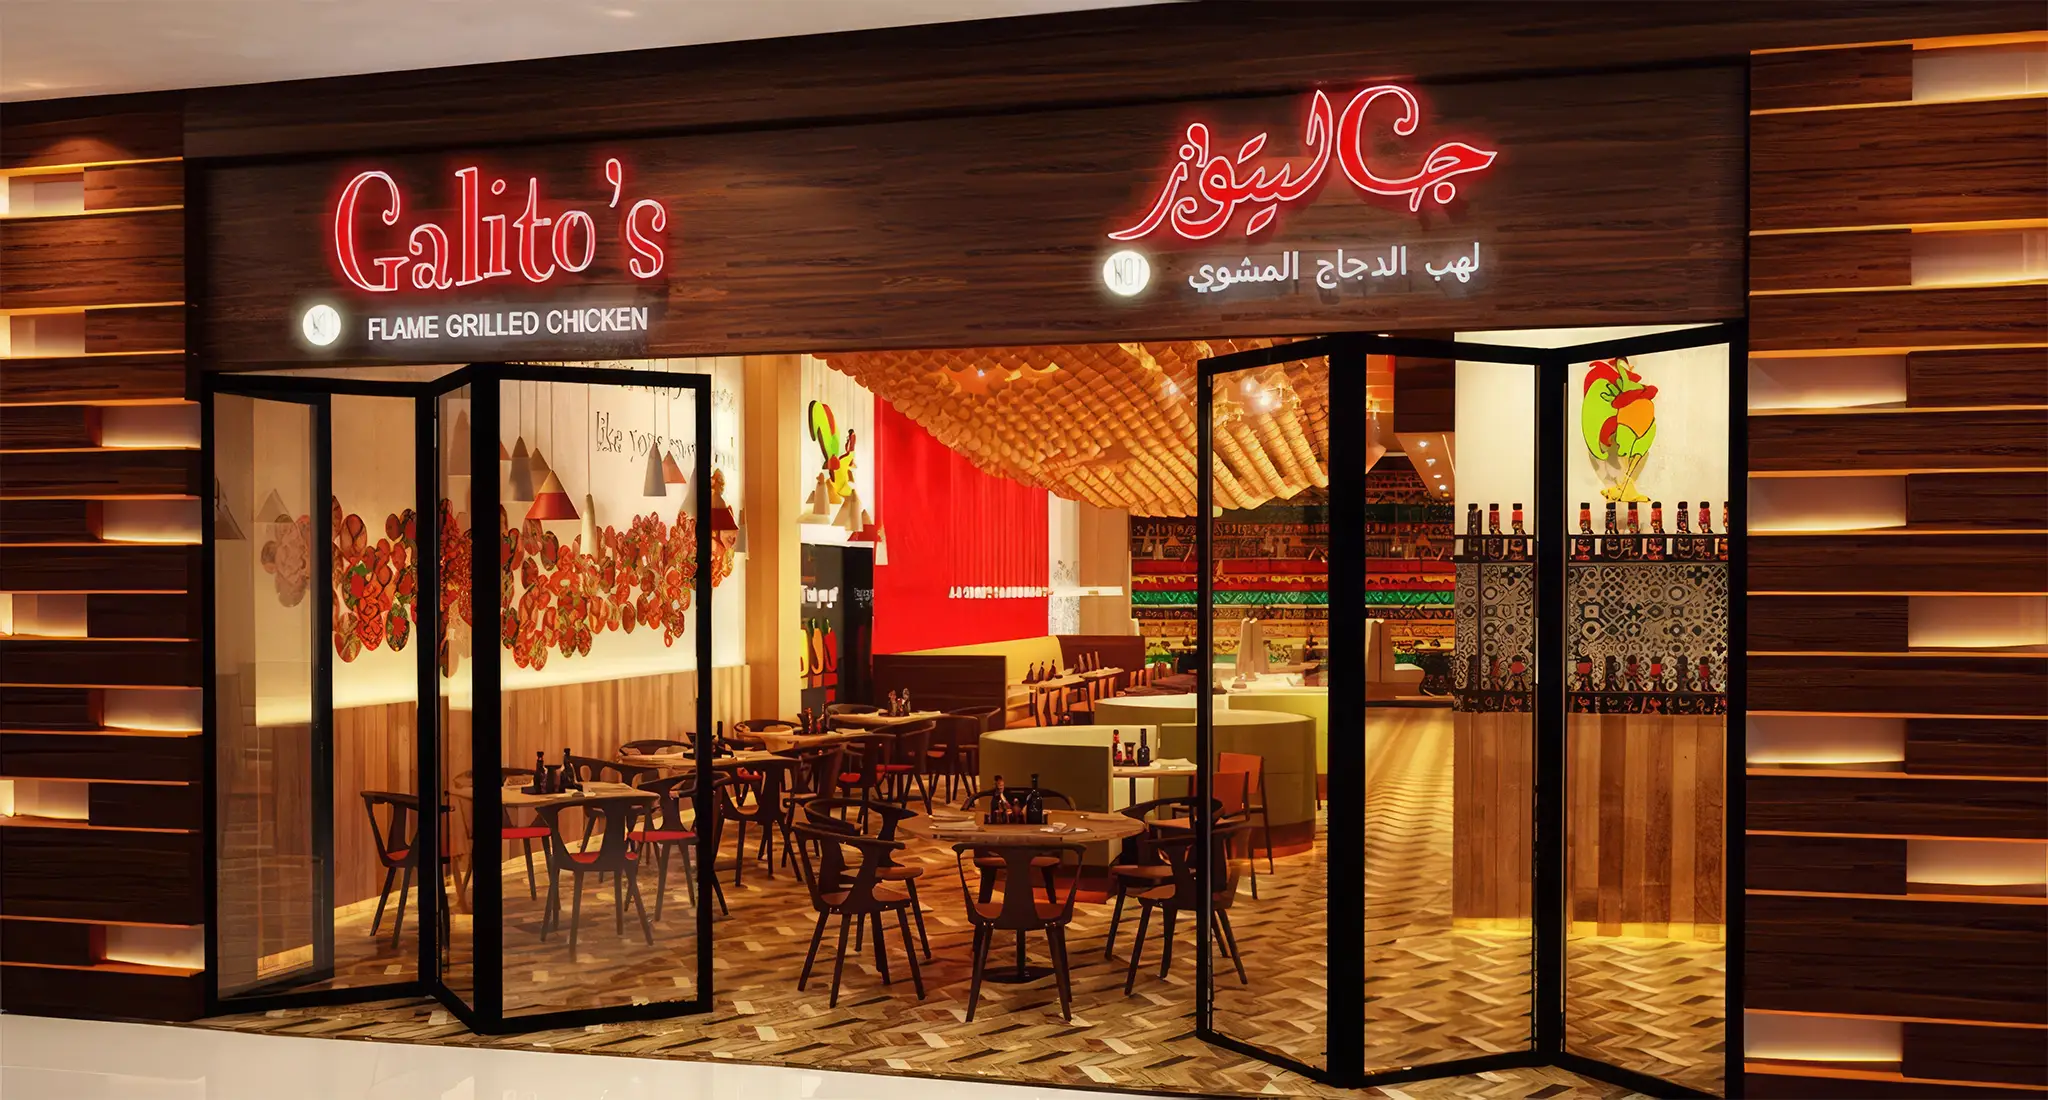 the entrance to galito's, a restaurant in dubai festival city, featuring a sizable glass door and a clearly visible sign.